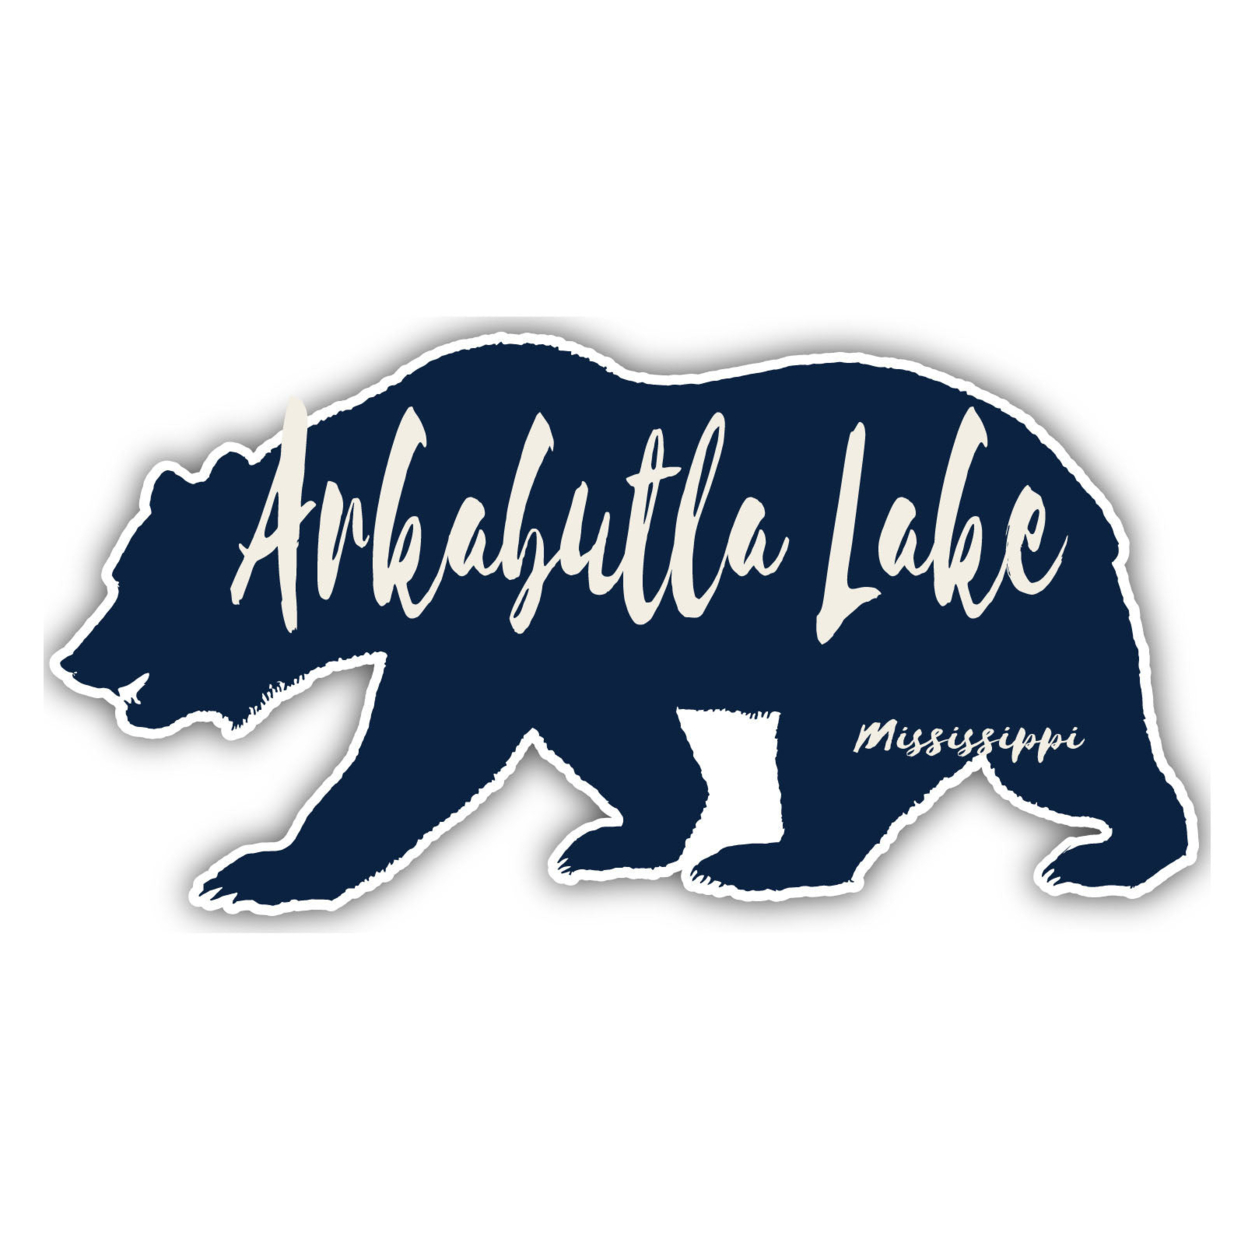 Arkabutla Lake Mississippi Souvenir Decorative Stickers (Choose Theme And Size) - 4-Pack, 8-Inch, Bear